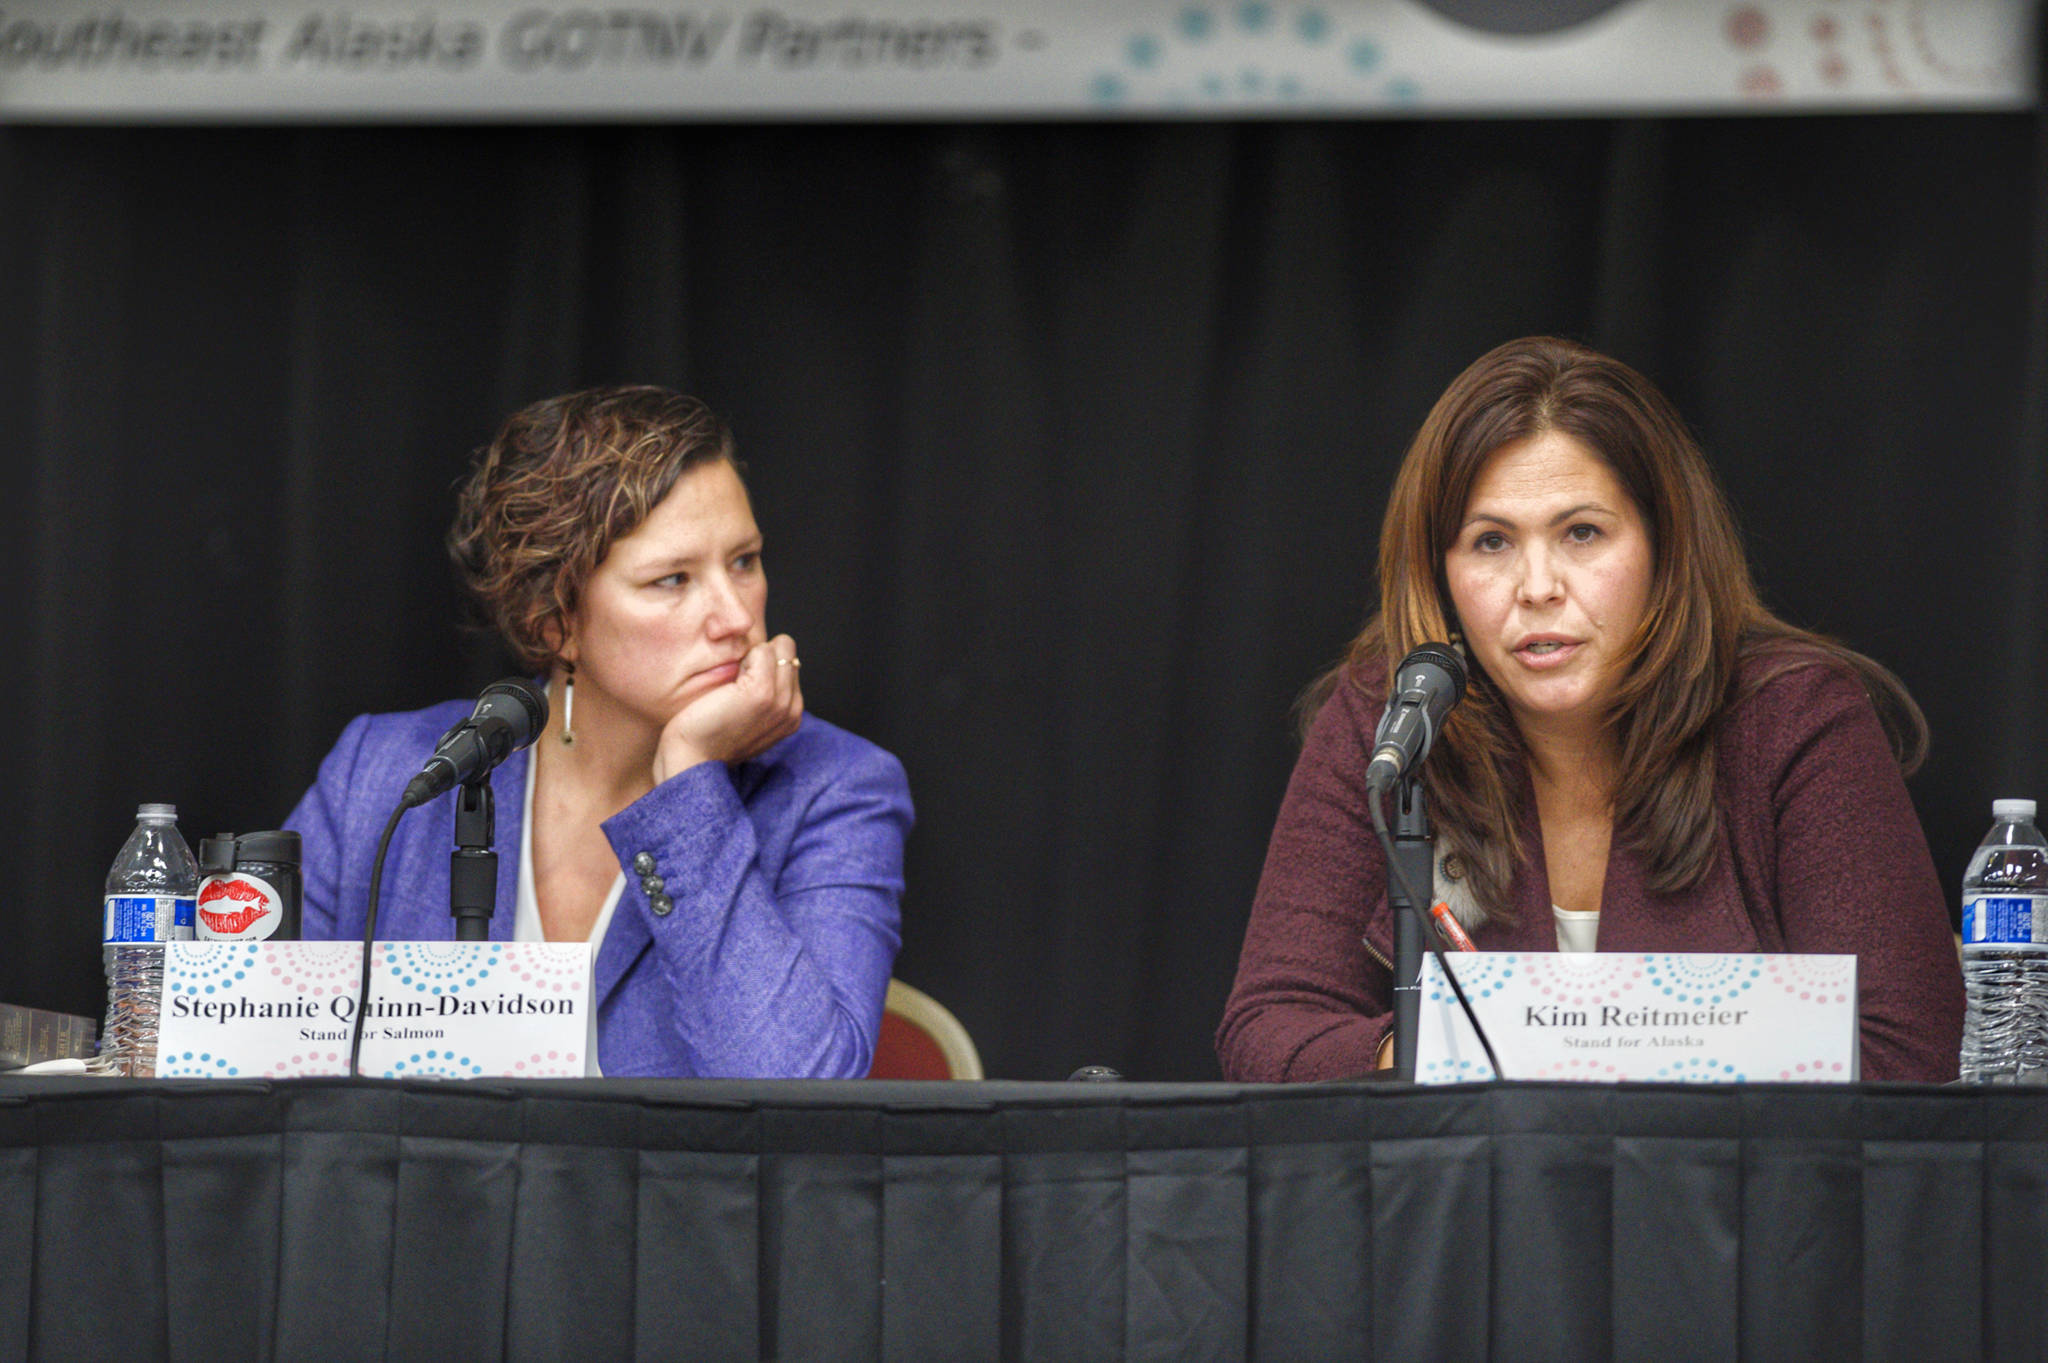 Stephanie Quinn-Davidson, left, of Yes for Salmon, listens as she debates the merits of Ballot Measure 1 with Kim Reitmeier, representing Stand for Alaska, during a Get Out the Native Vote Southeast forum at Elizabeth Peratrovich Hall on Tuesday, Oct. 9, 2018. (Michael Penn | Juneau Empire)